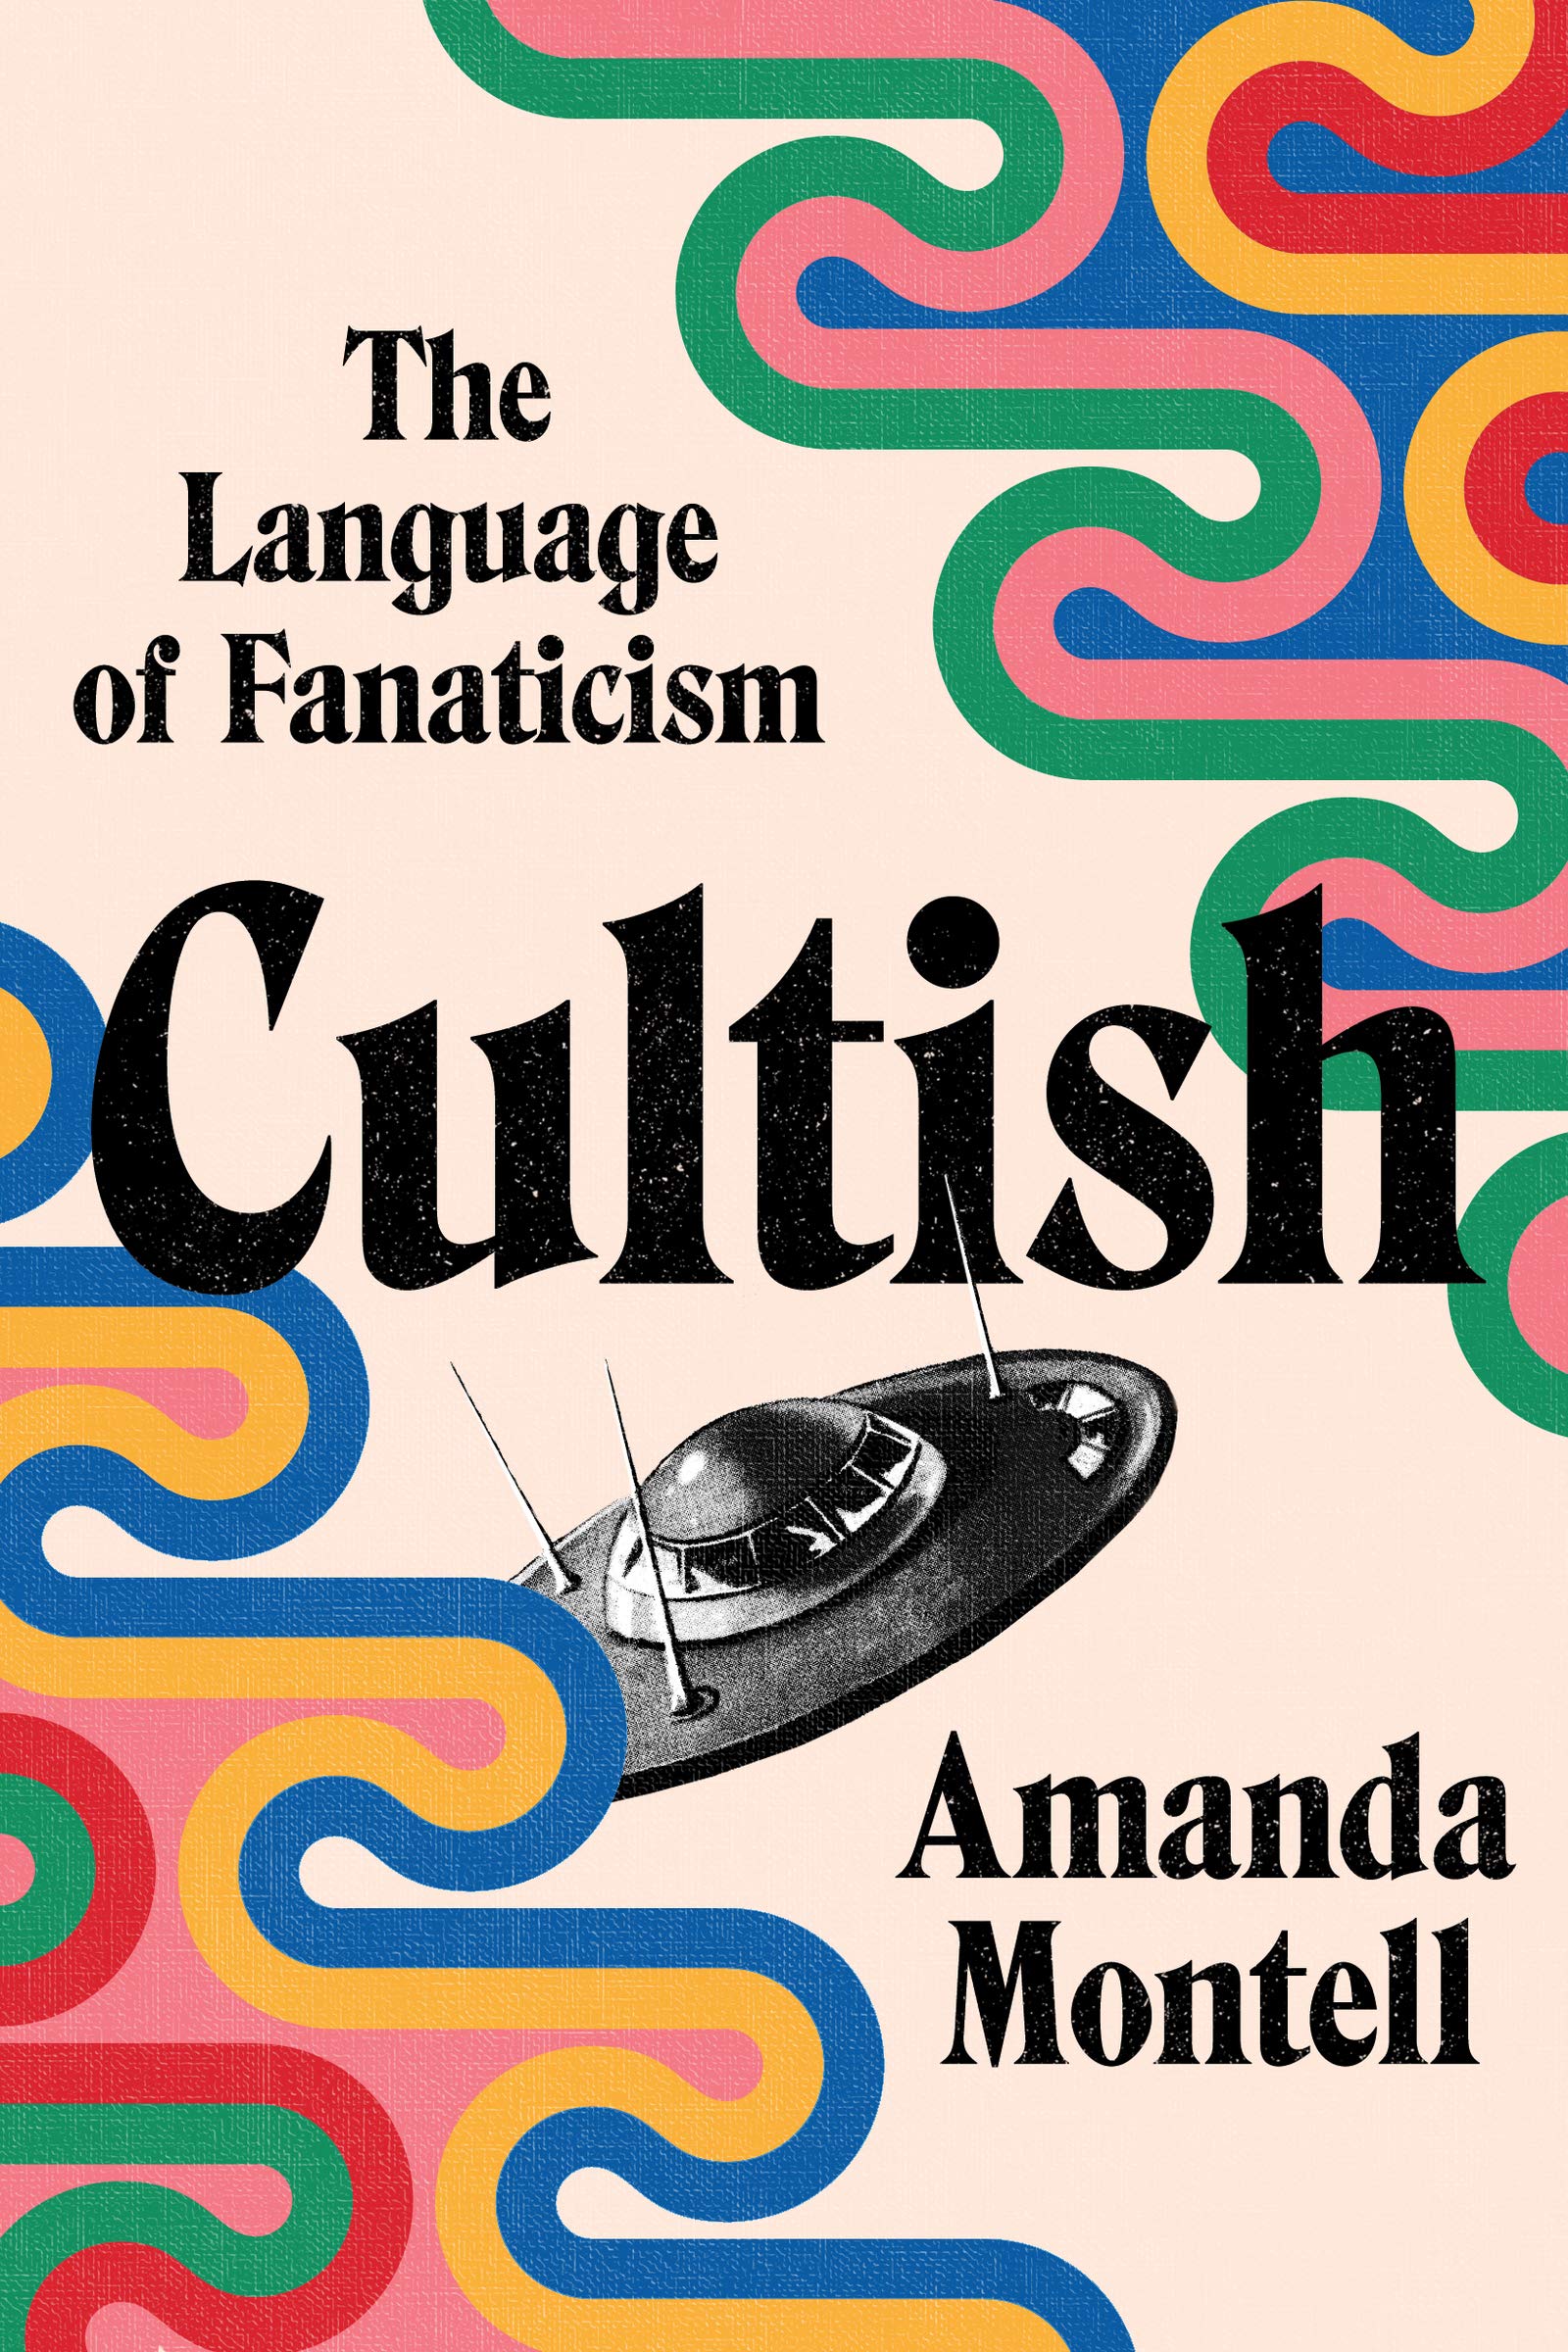 Cultish: The Language of Fanaticism (eBook) by Amanda Montell $1.99